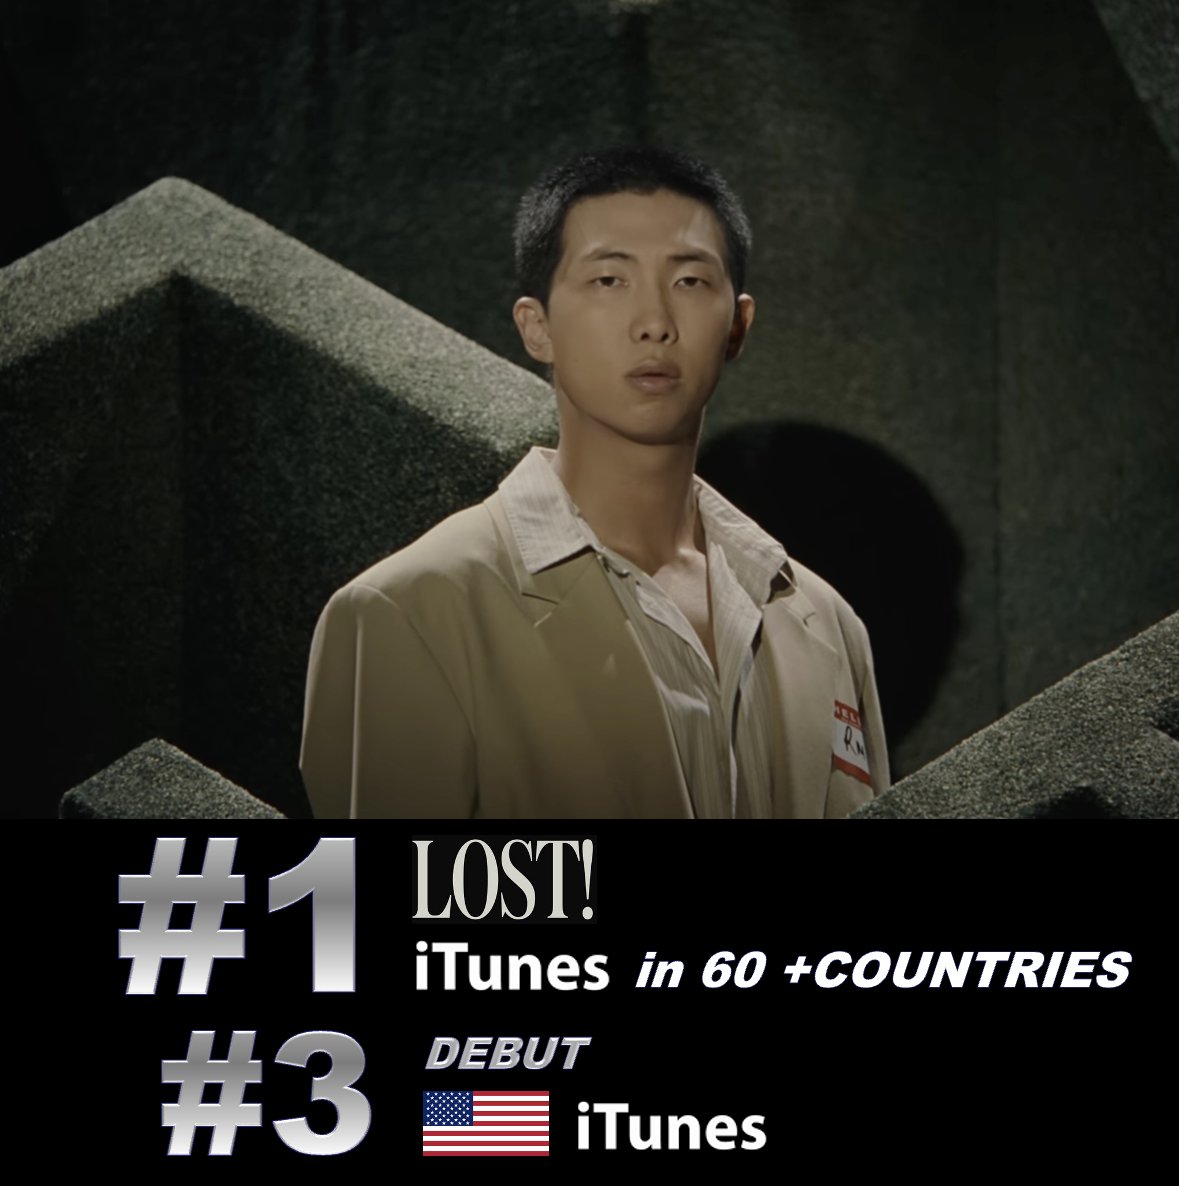 #RM has reached the Top 3 (+133) of the Global Digital Artist Rank as 'LOST' hits #1 on iTunes in over 60 countries (63) and debuts in the TOP 3 of US iTunes! 💪👨‍🎤3⃣🌎➕🎶💥1⃣🎵✖️6⃣3⃣🌎➕🆕💥3⃣🇺🇸🎵🔥👑💙 #1 on iTunes in 63 countries #1 Argentina #1 Armenia #1 Austria #1